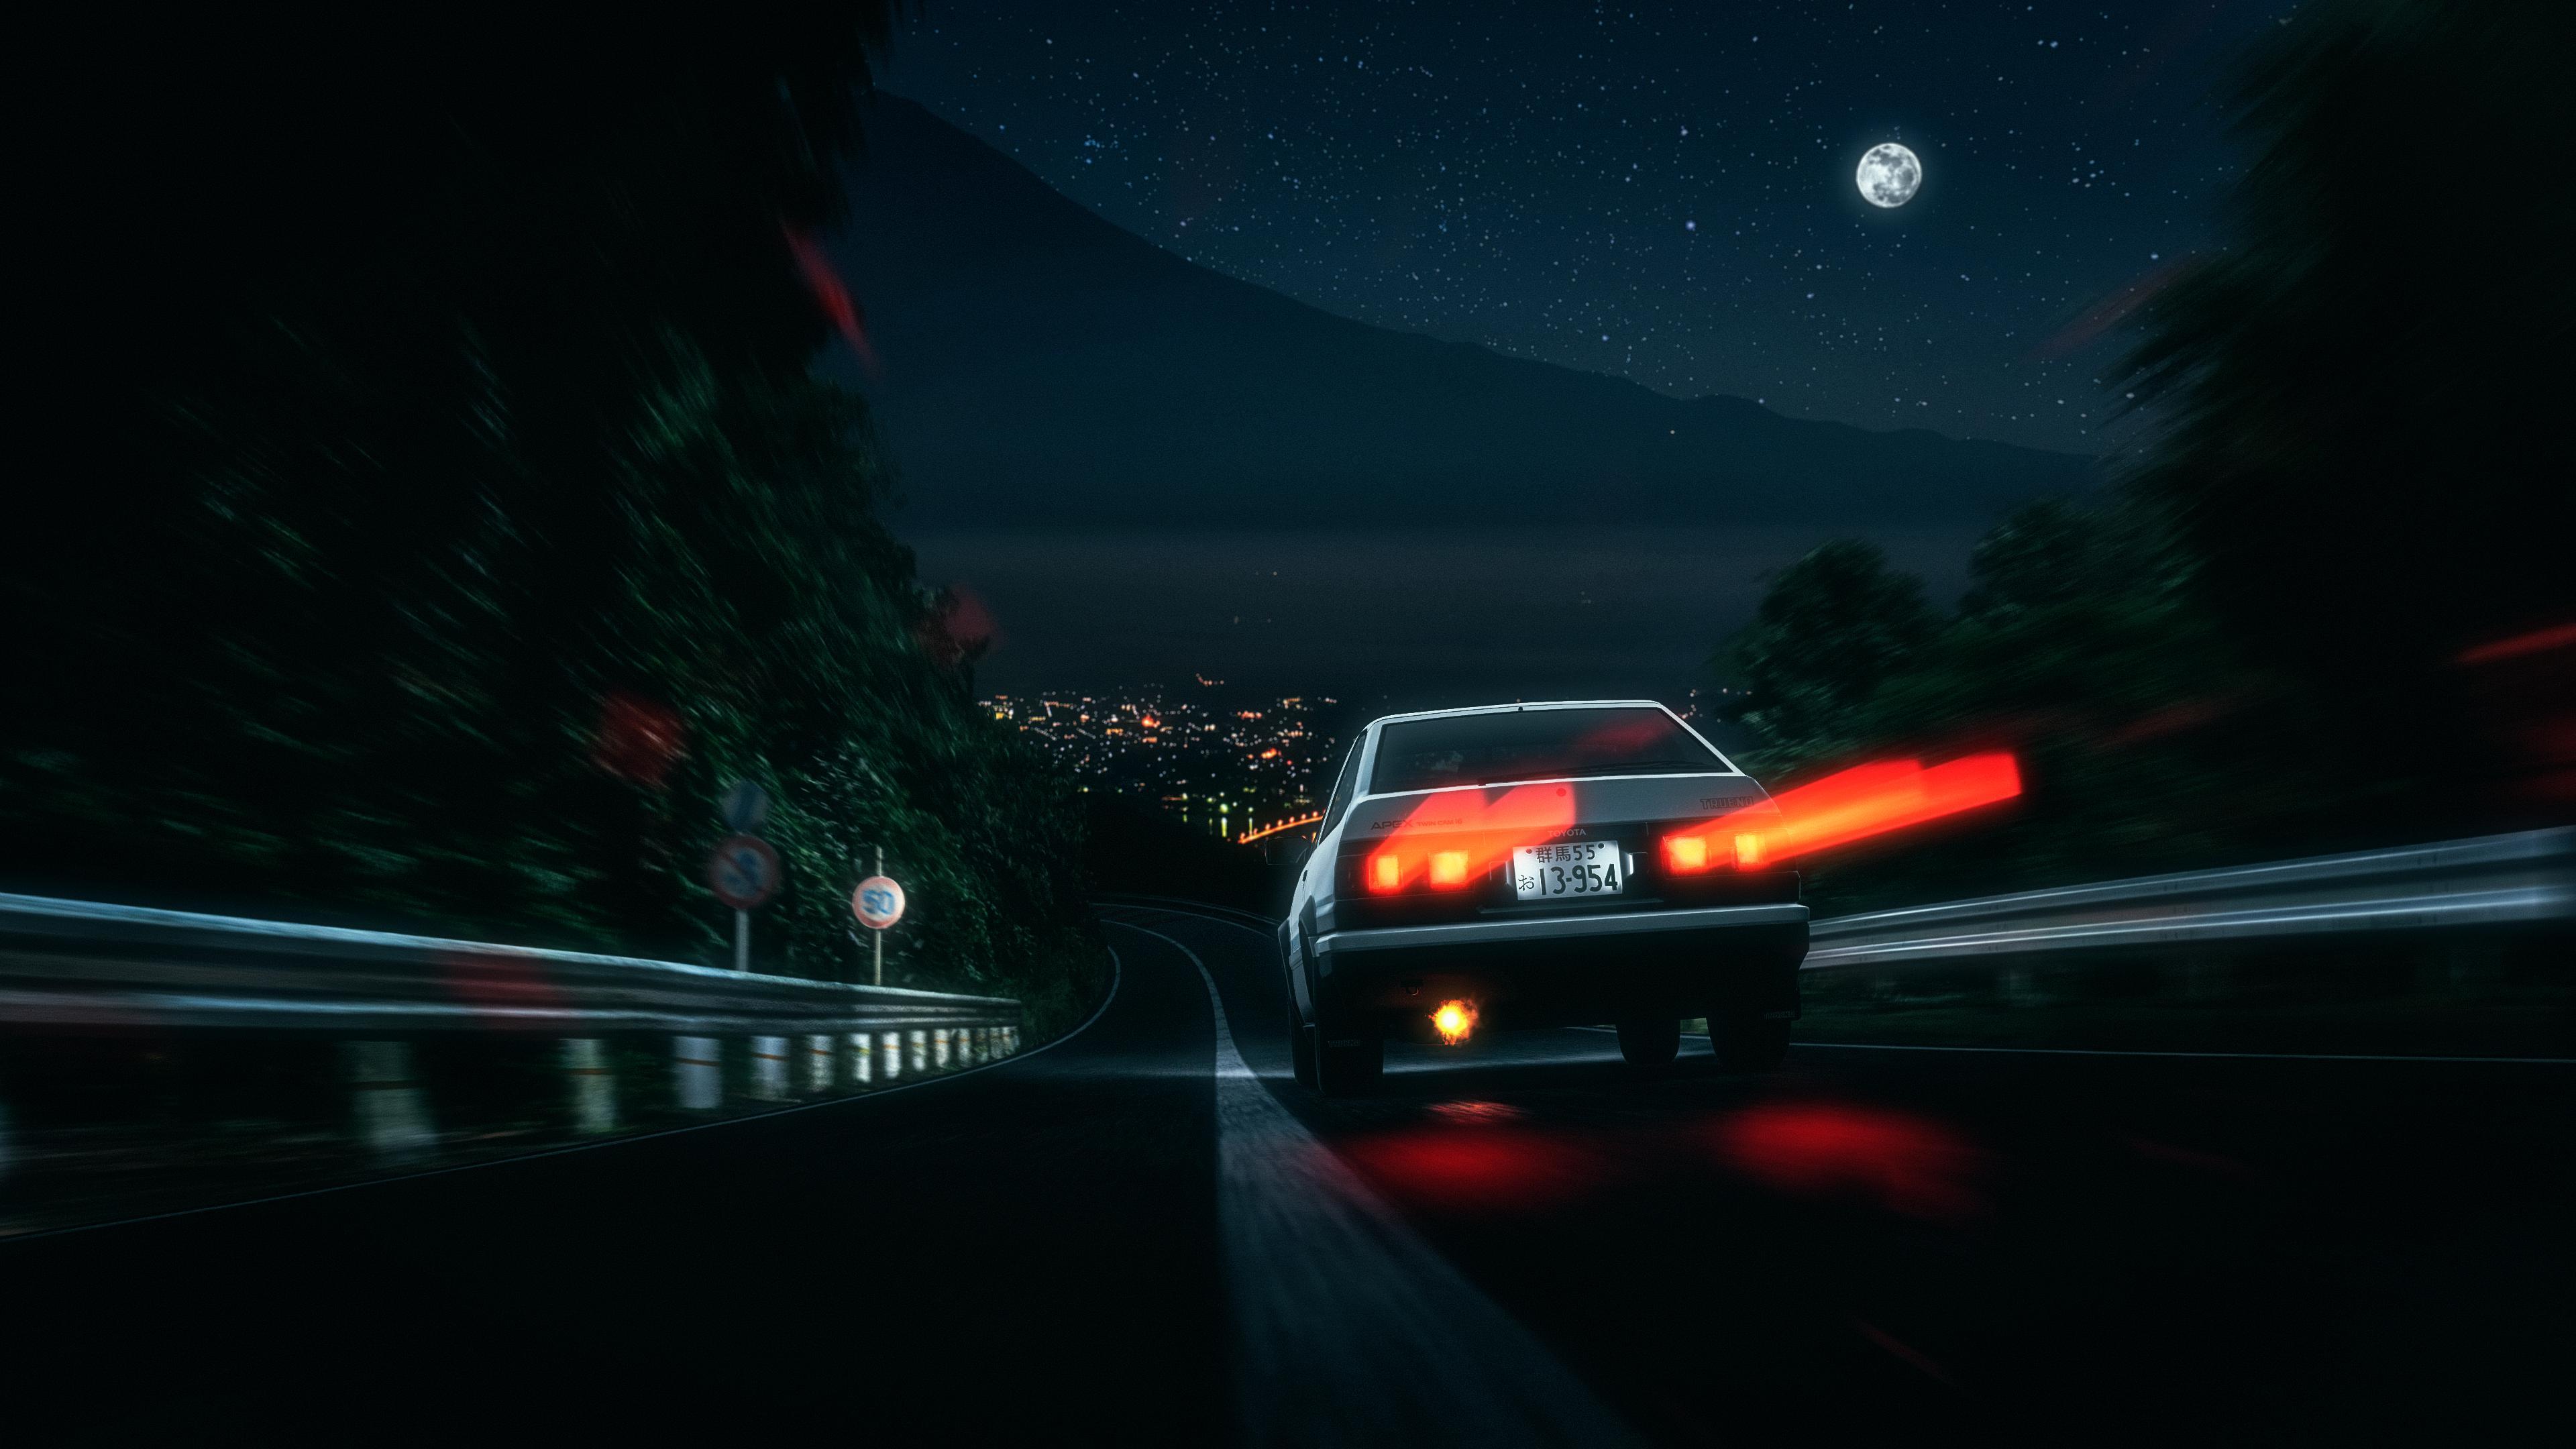 3840 x 2160 · jpeg - Initial D by RaY29rus [3840x2160] : wallpapers